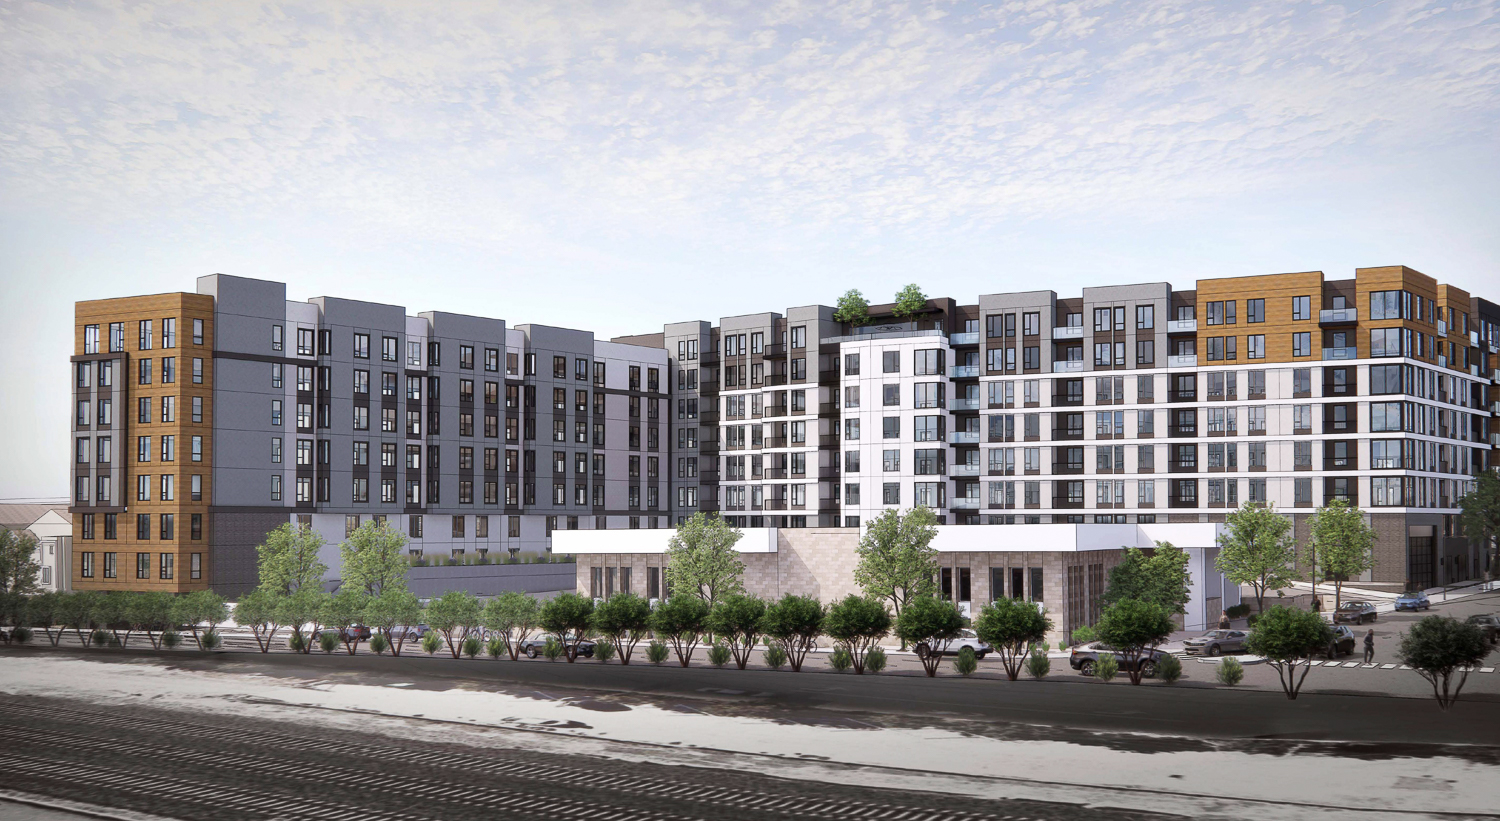 1766 El Camino Real seen from across the Caltrain tracks, rendering by TCA Architects